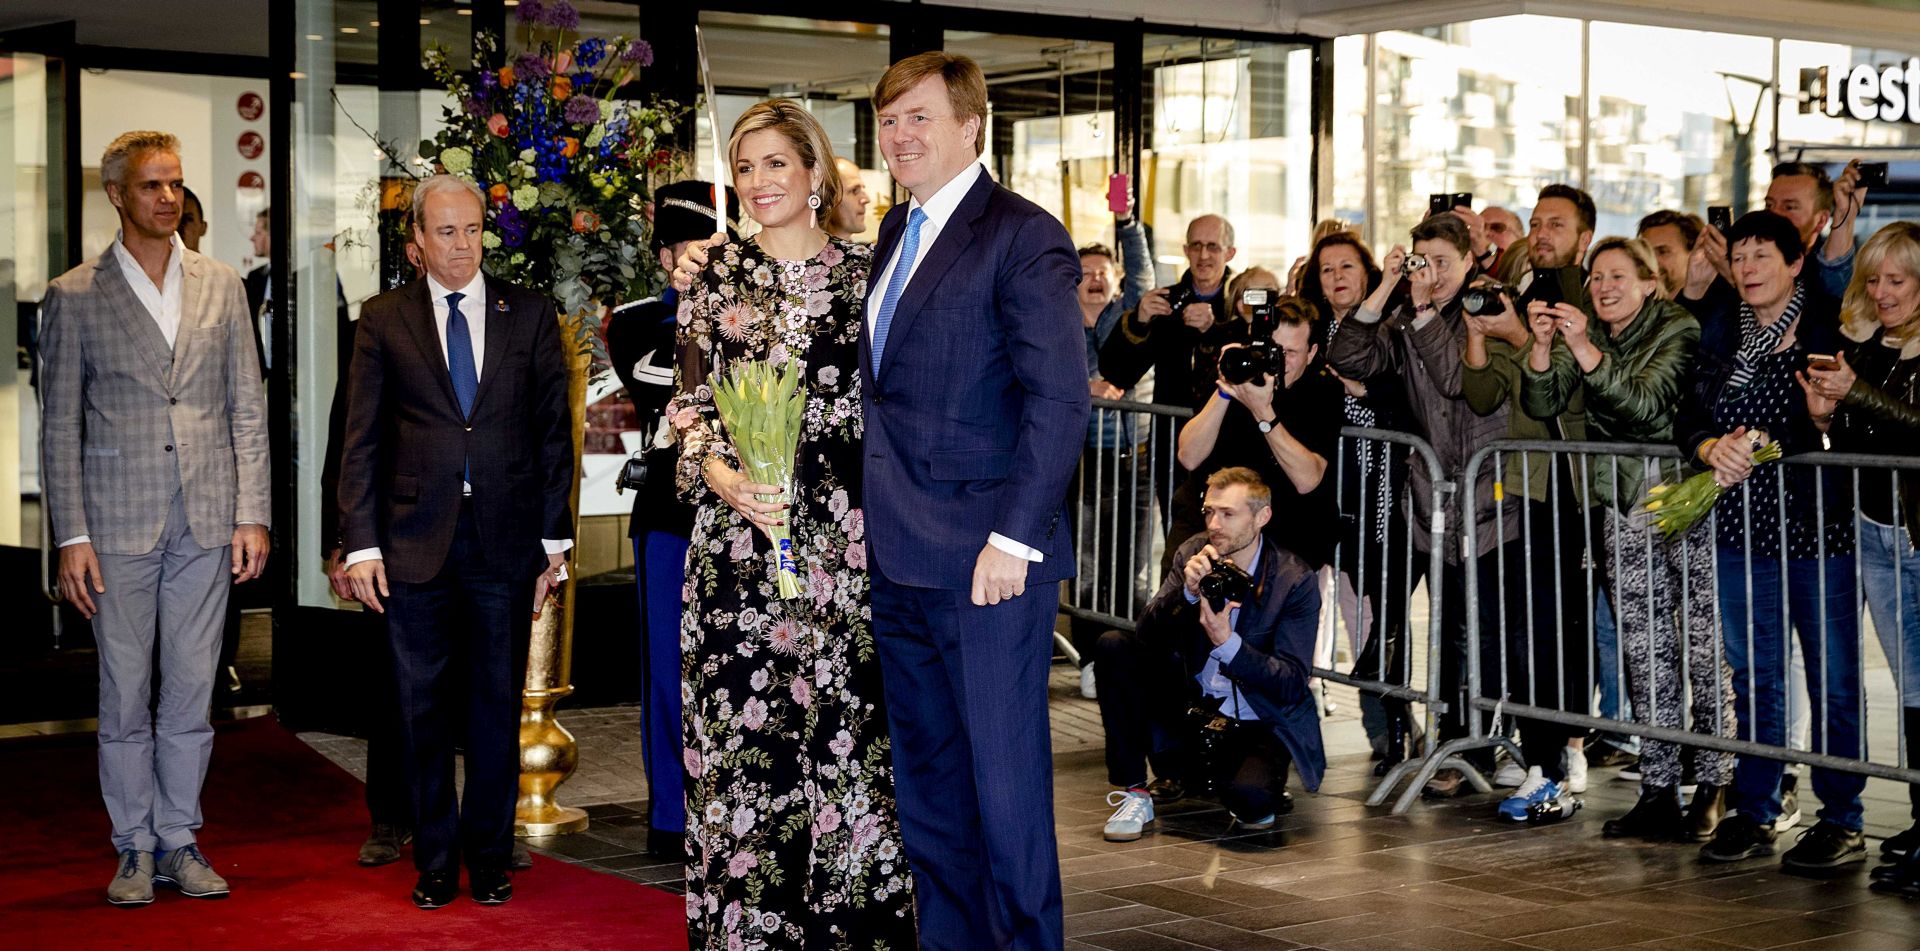 epa05886657 Dutch King Willem-Alexander (C-R) and Queen Maxima (C-L) arrive for the 'Koningsdagconcert' (King's Day Concert) at Theaters Tilburg in Tilburg, The Netherlands, 03 April 2017. The concert is giving in honor of King's Day, which this year will be held on 27 April.  EPA/ROBIN VAN LONKHUIJSEN